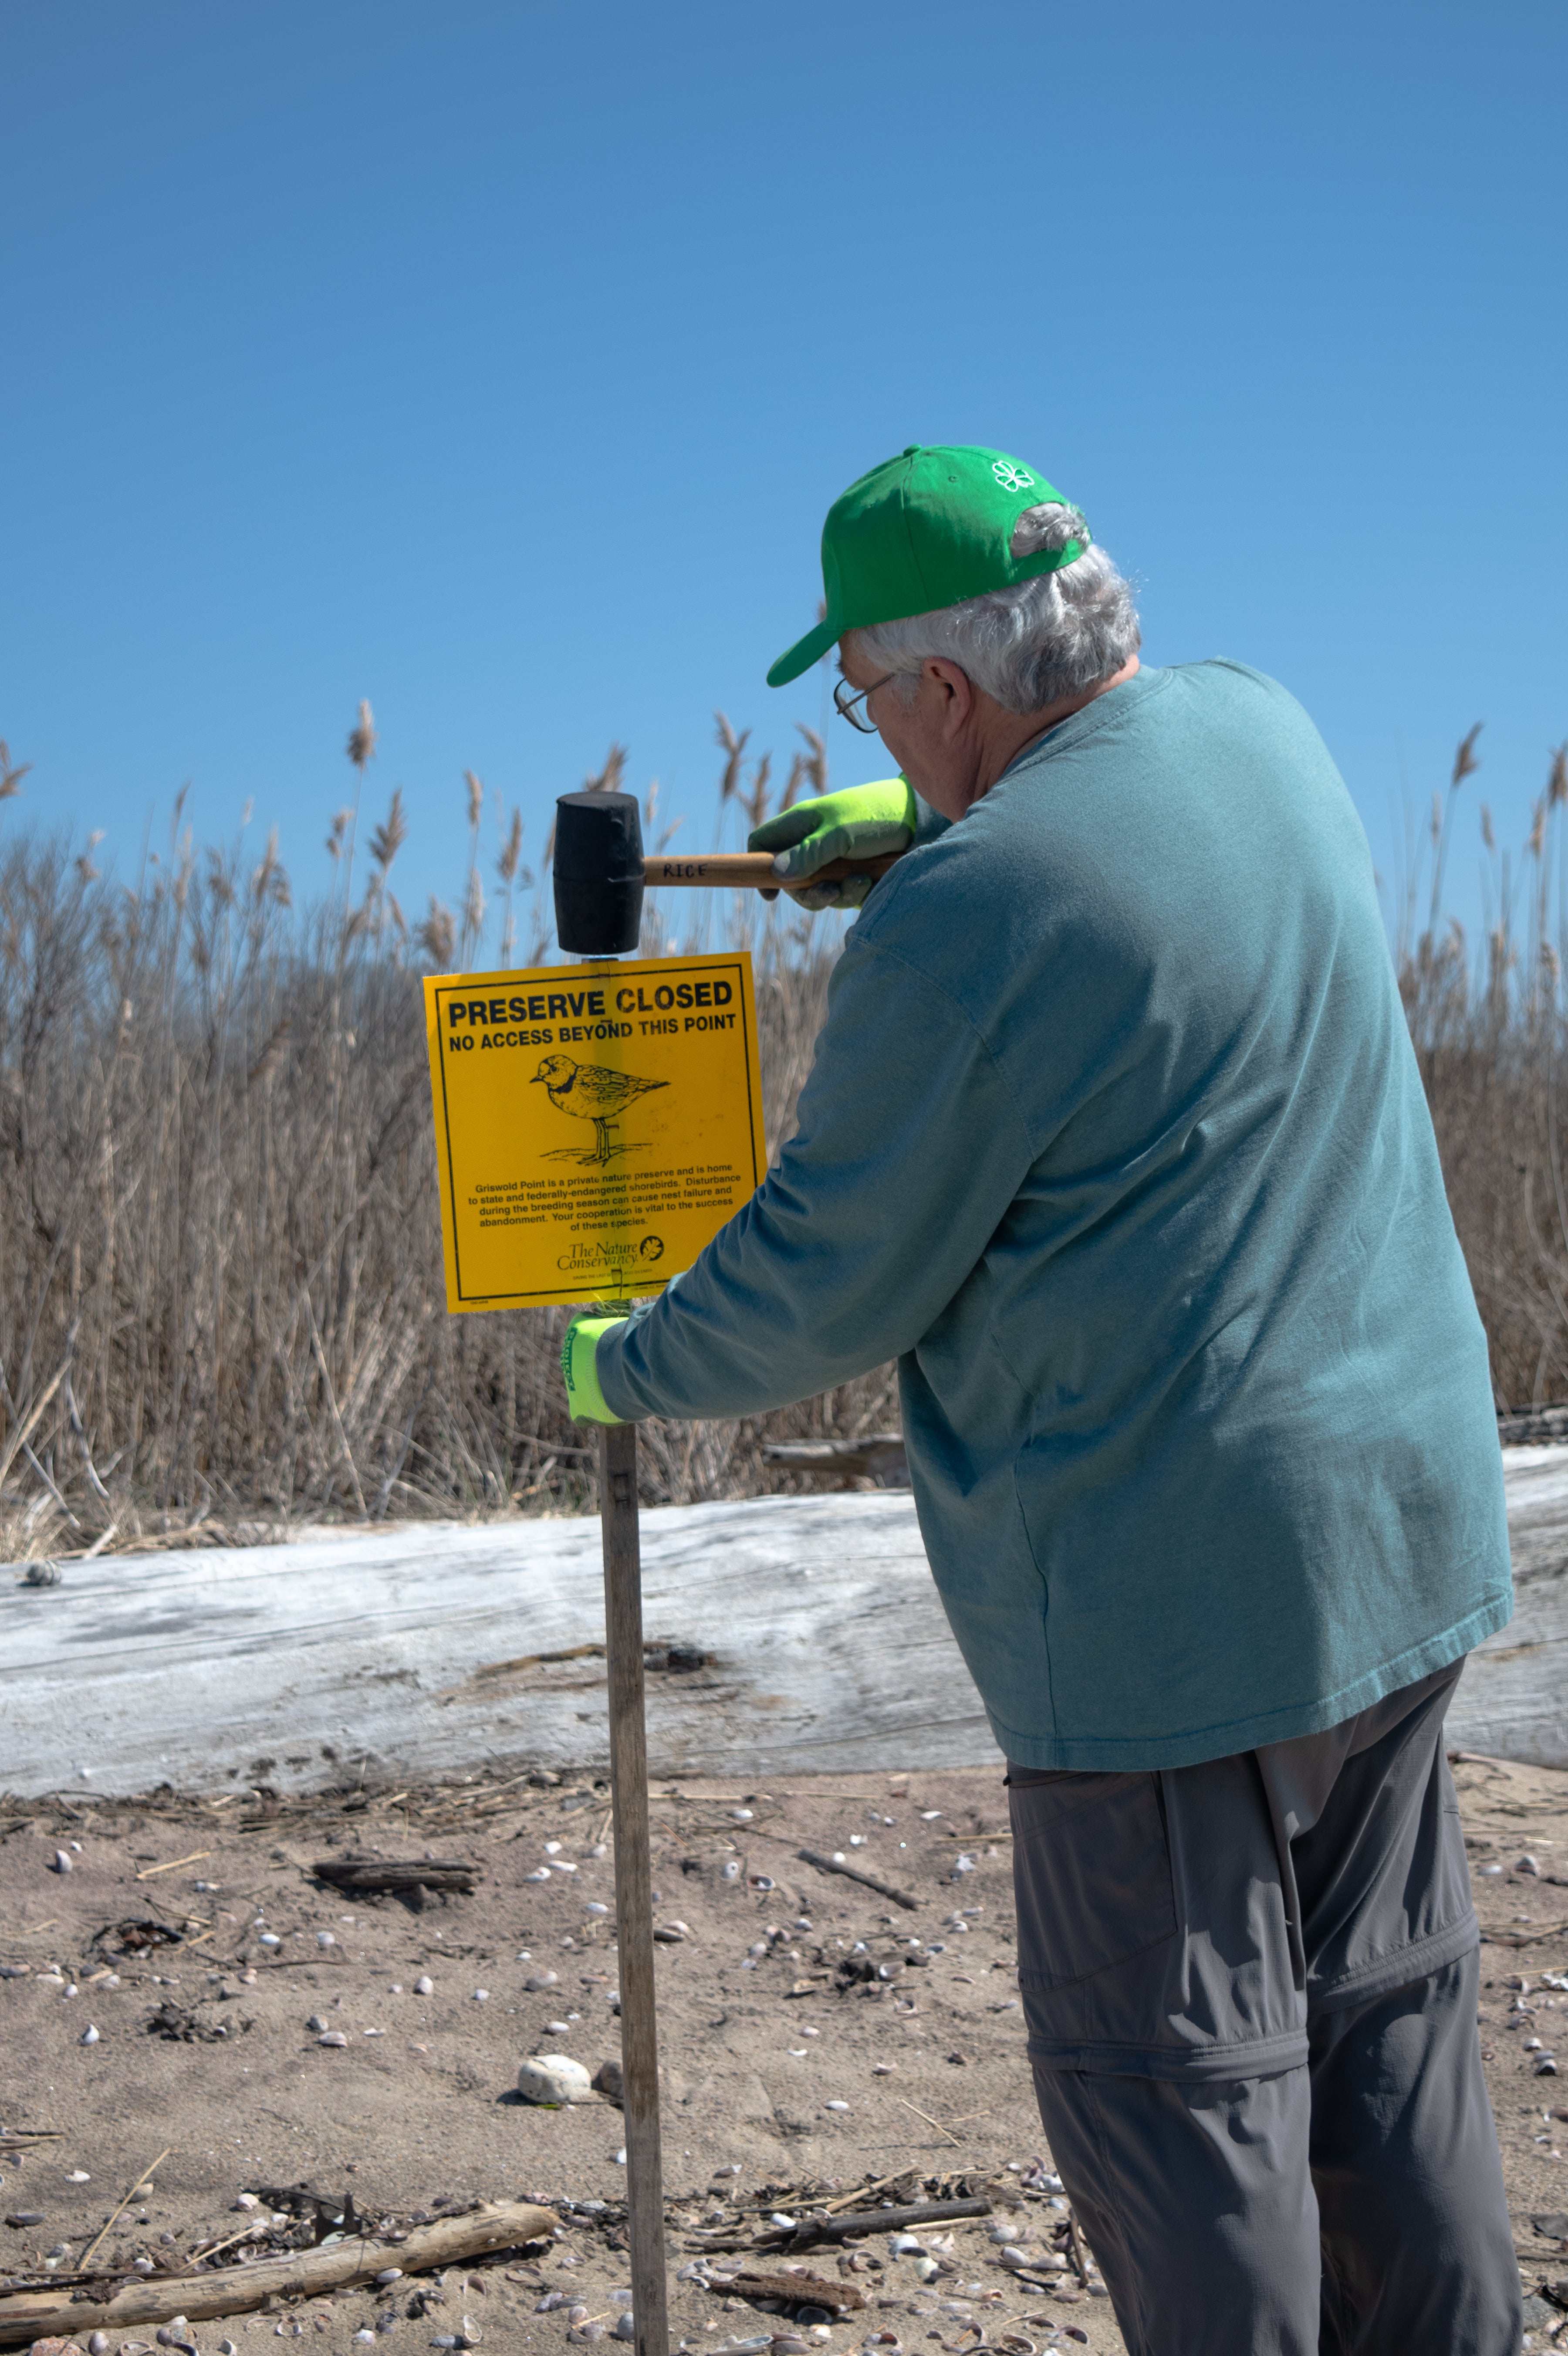 A person wearing a green hat hammers a sign into sandy soil.